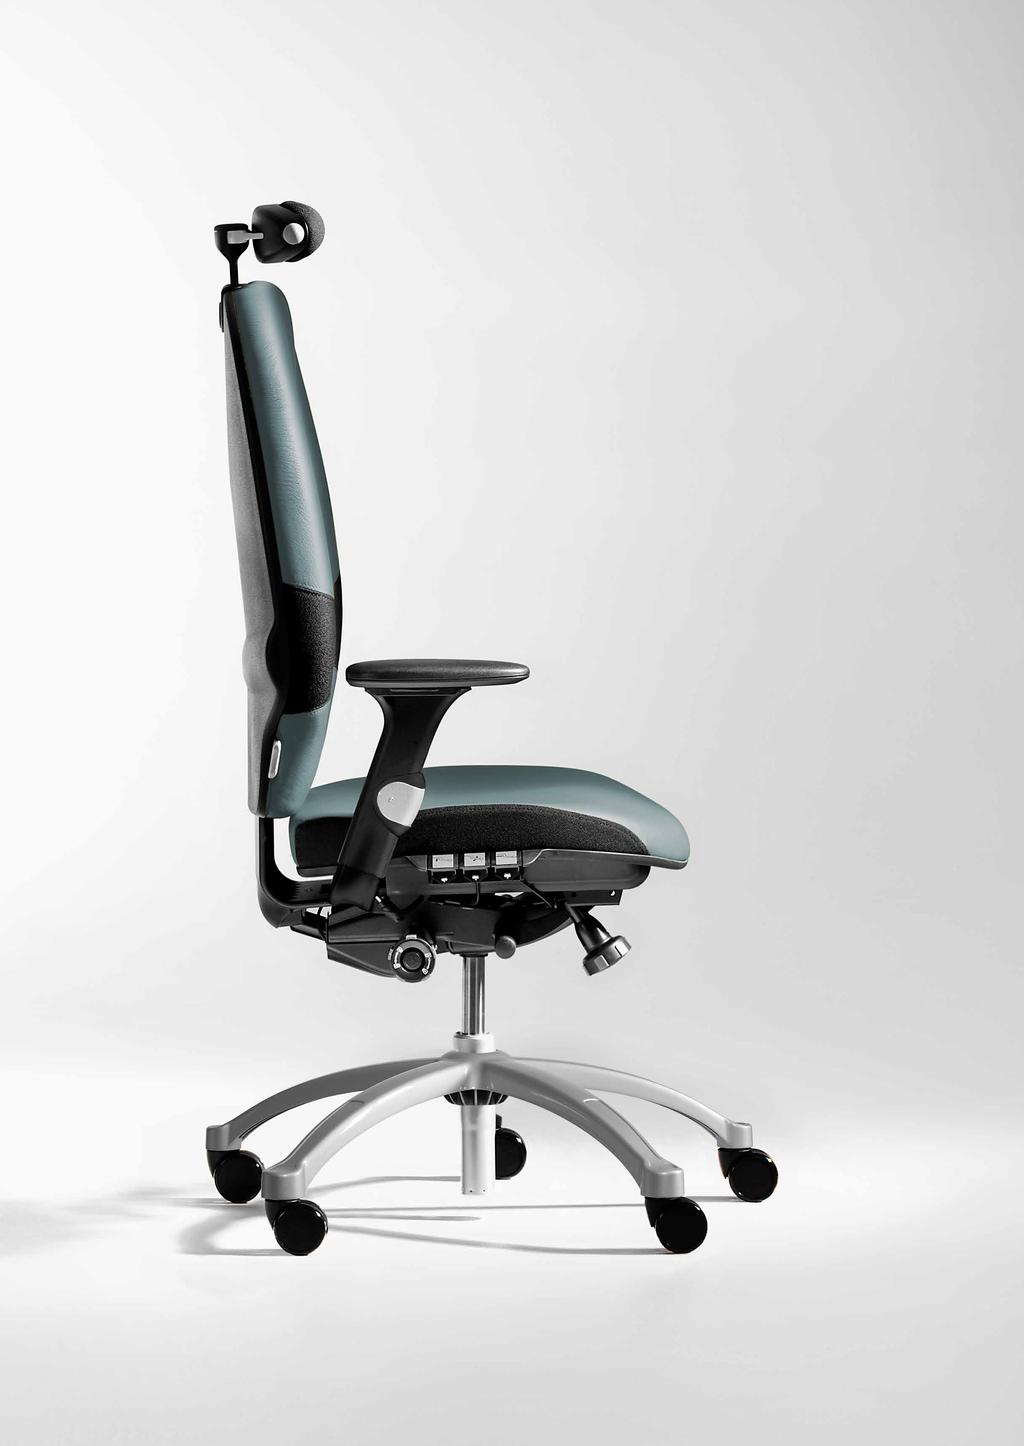 The neckrest can be adjusted by height and depth, providing comfort and support. Armrests are optional but are recommended since they provide relief for the shoulders.